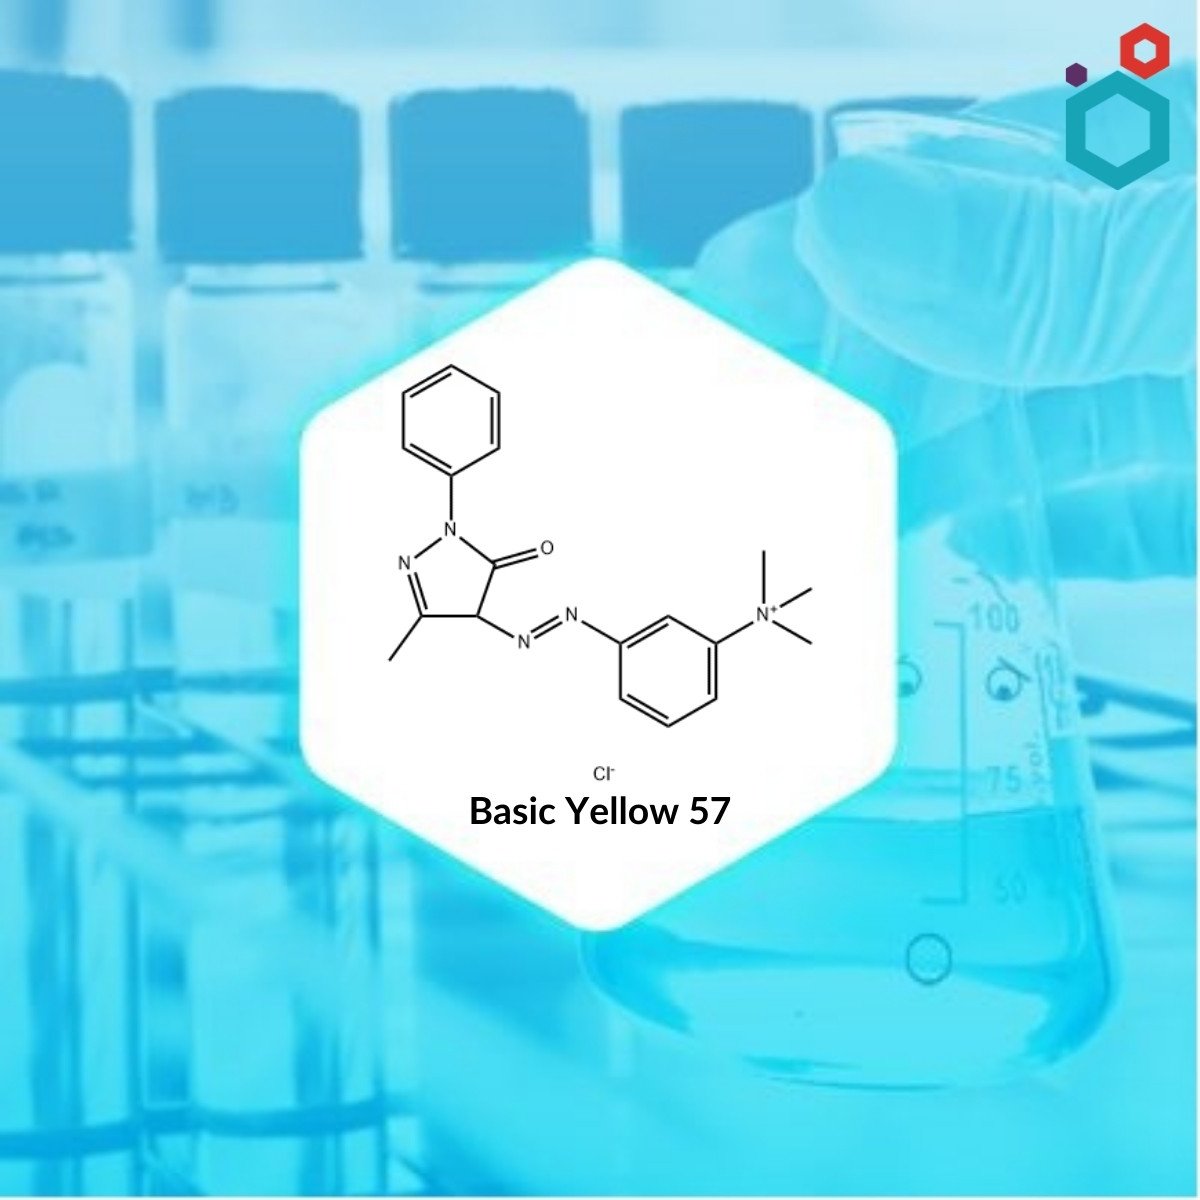 Basic Yellow 57 Chemical Structure